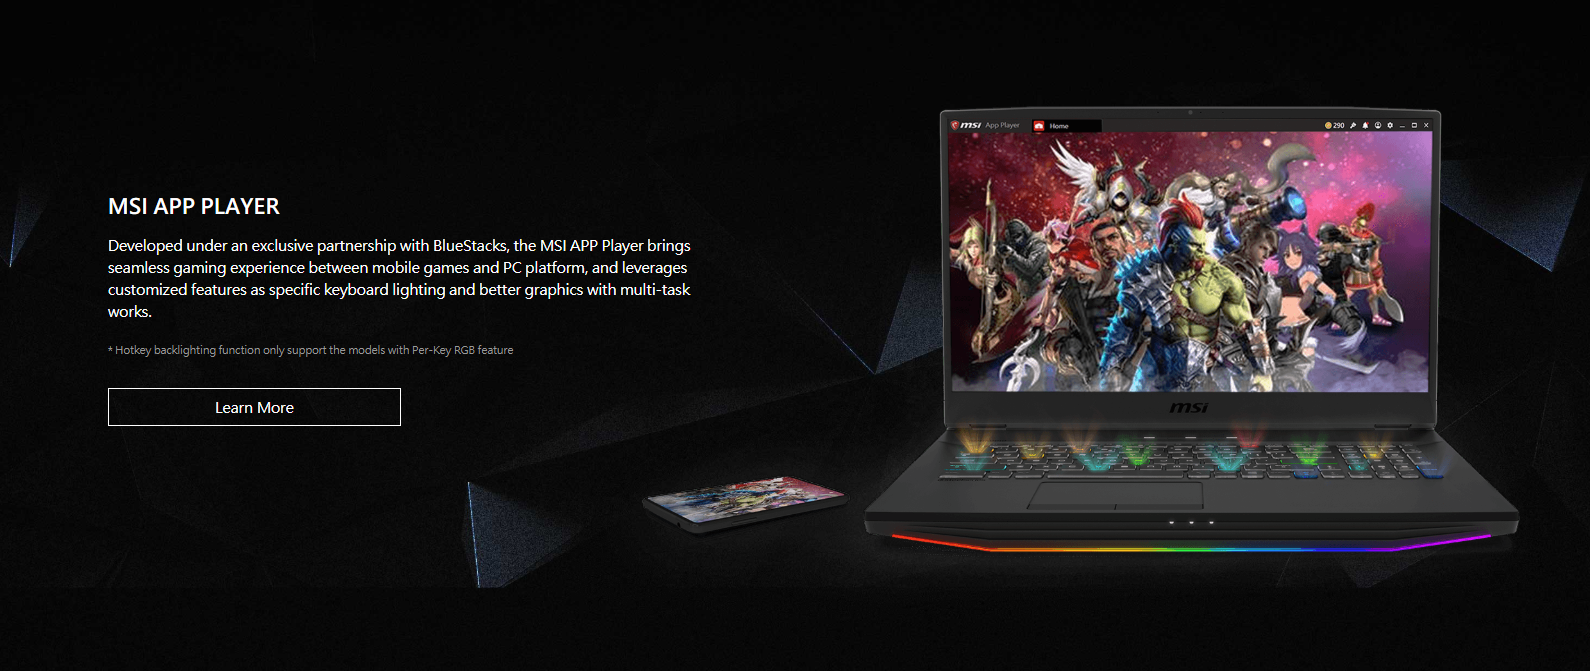 Developed under an exclusive partnership with BlueStacks, the MSI APP Player brings seamless gaming experience between mobile games and PC platform, and leverages customized features as specific keyboard lighting and better graphics with multi-task works.